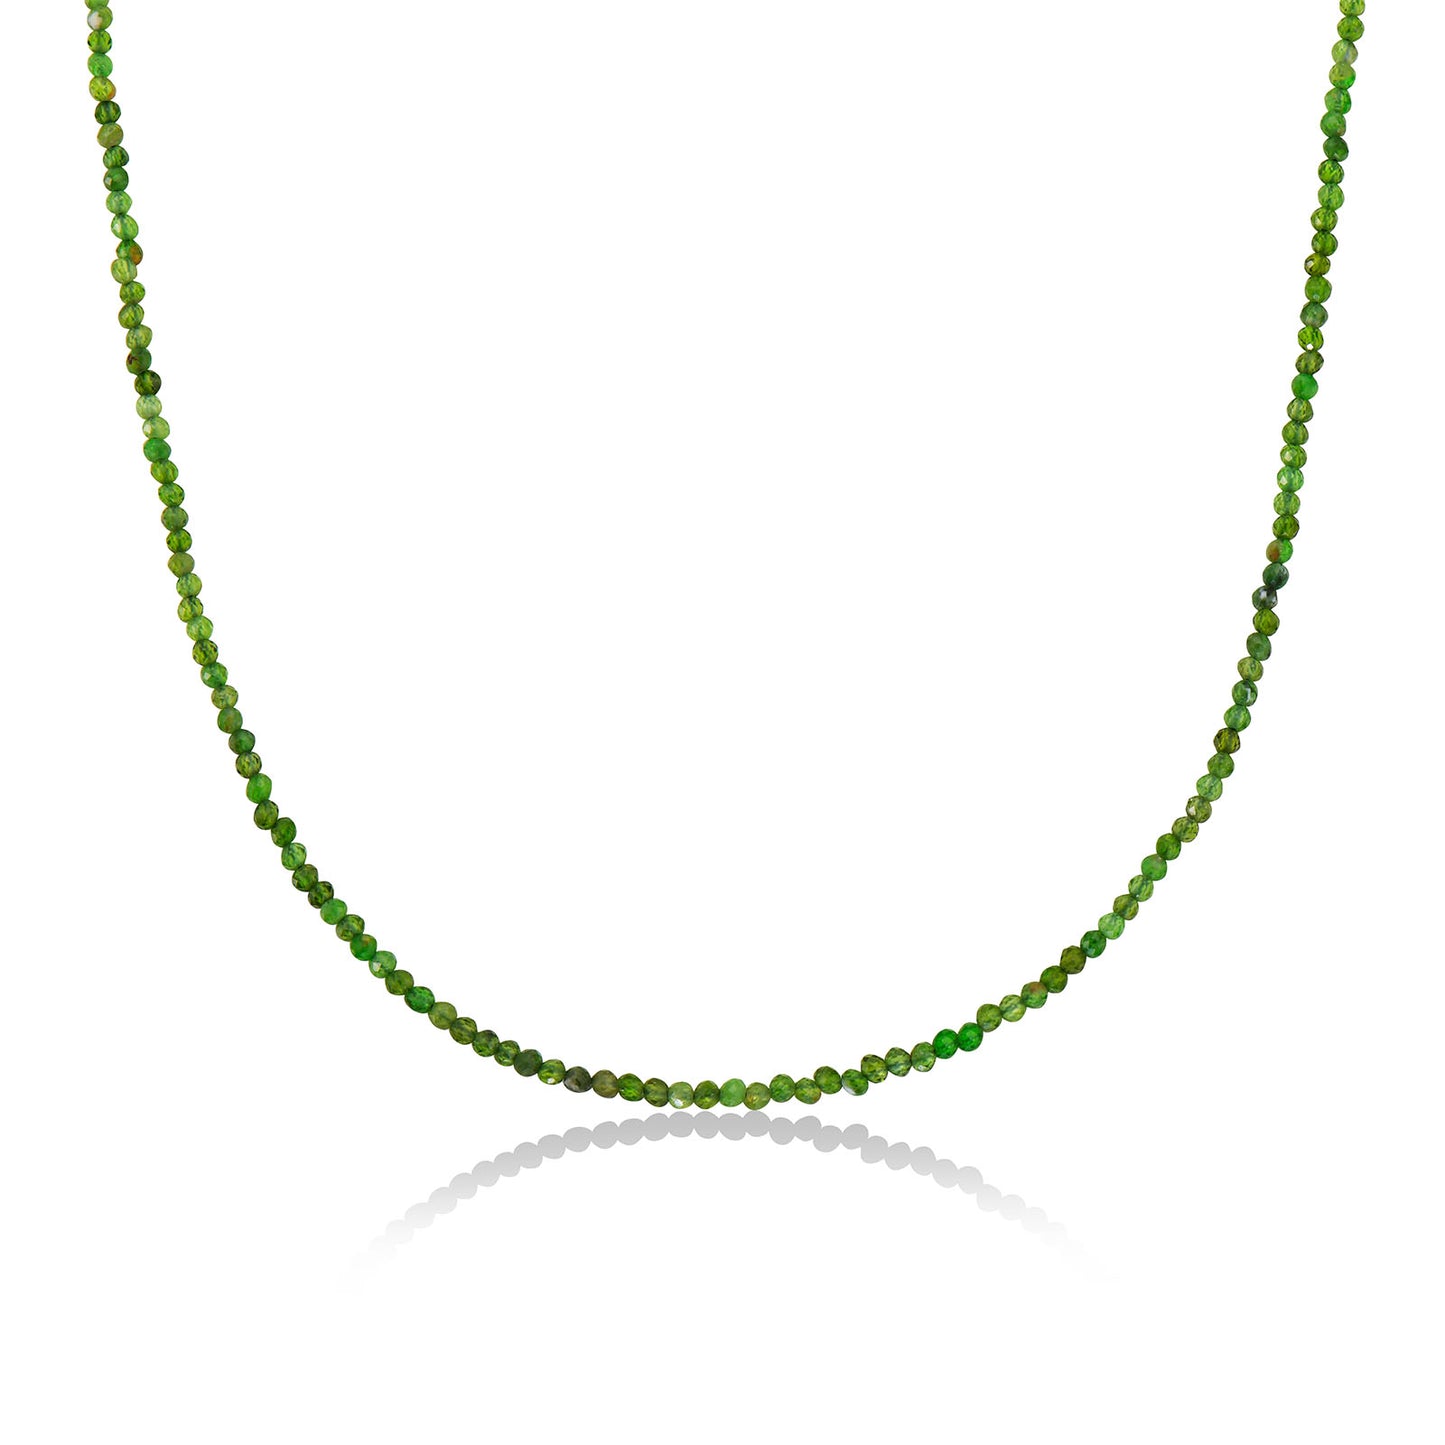 Shimmering beaded necklace made of 2mm faceted opals in shades of green on a gold linking lobster clasp.